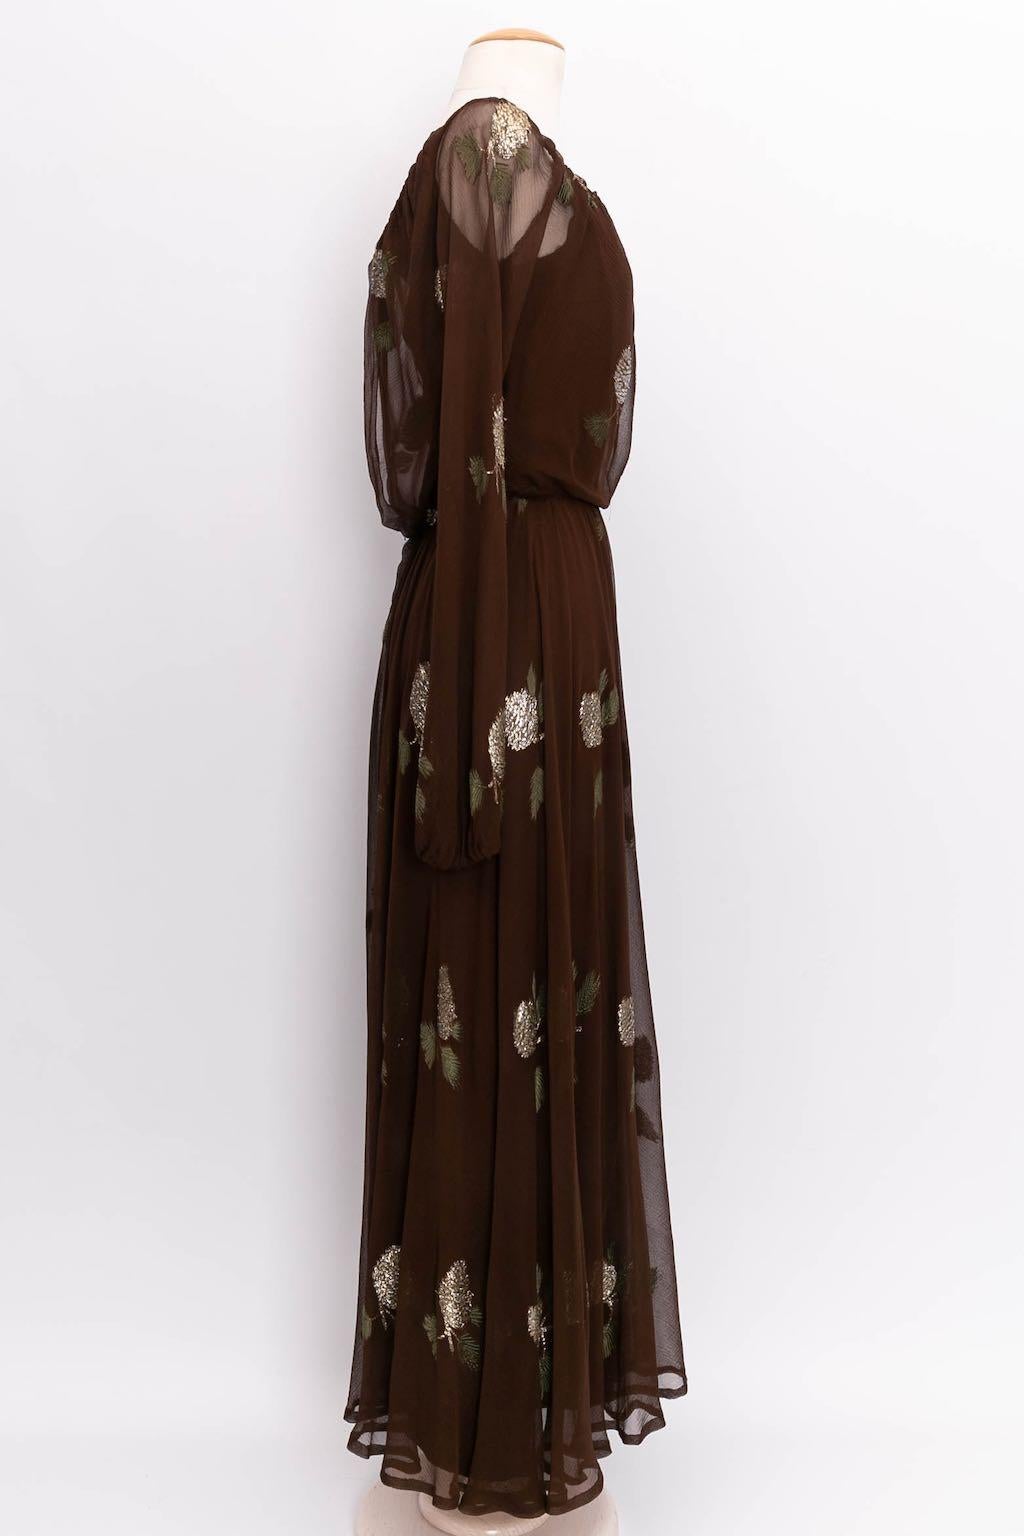 Jean Patou Haute Couture (Made in France) Runway dress in brown silk chiffon and lamé. 1974/1975 Winter Collection, worn by Maggie, appearance 52. No composition or size tag, it fits a size 36FR.

Additional information: 
Dimensions: Bust 38 cm